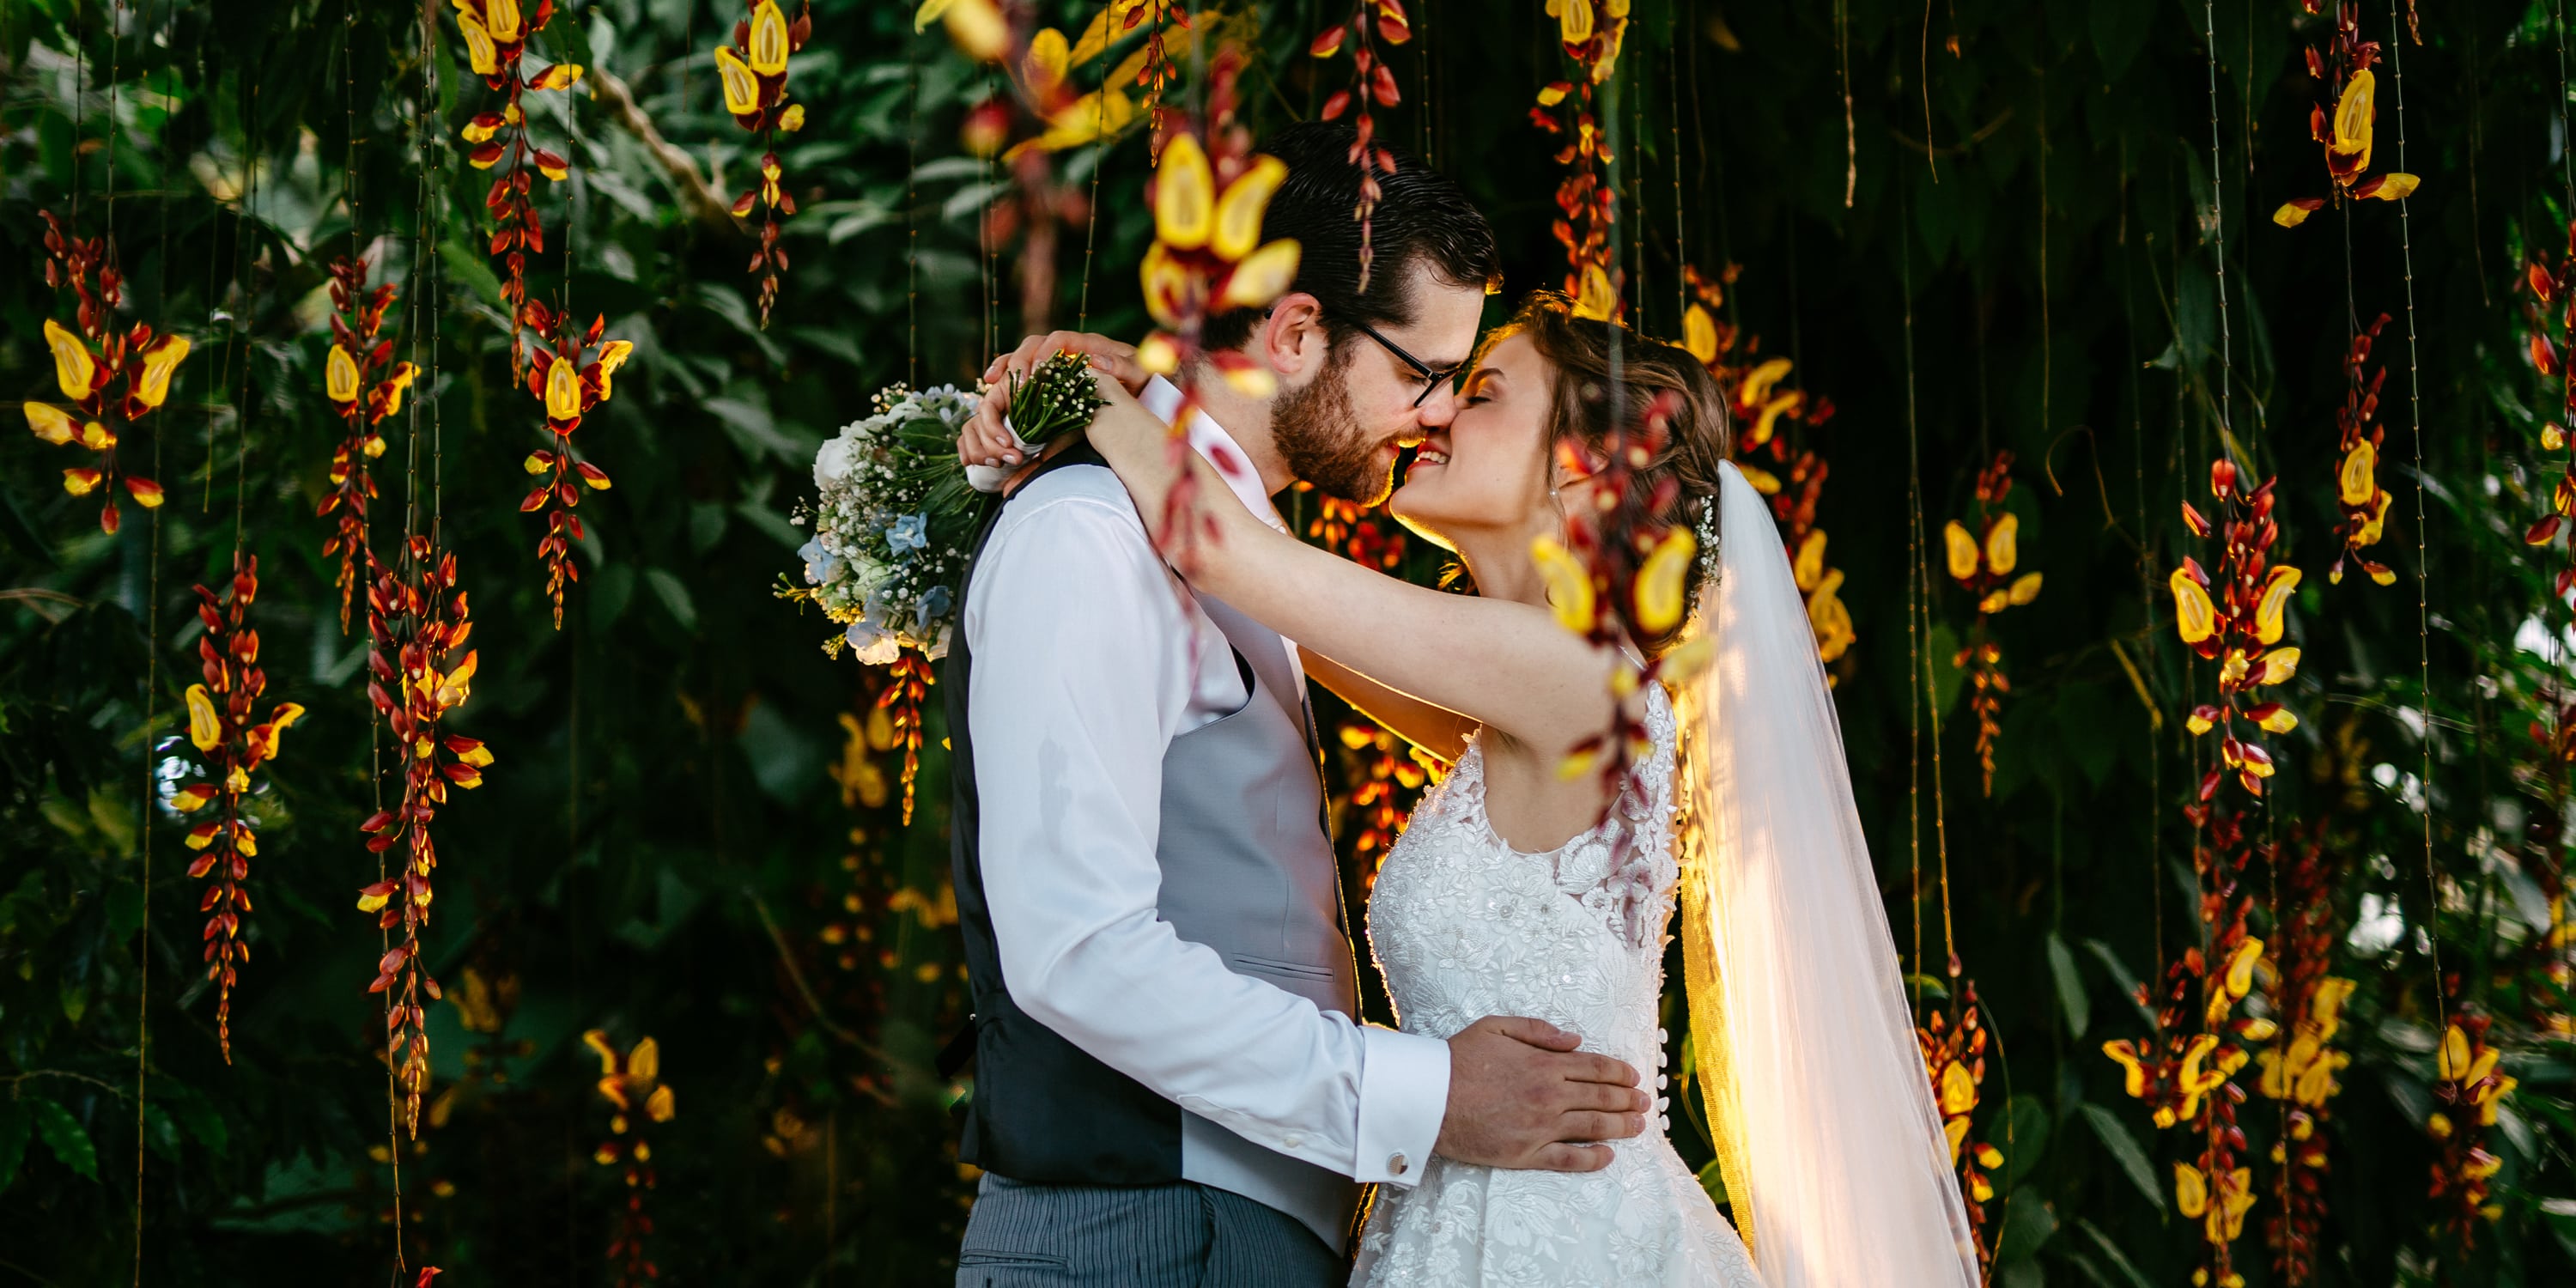 A bride and groom share a romantic kiss under a beautiful canopy of flowers at one of South Holland's picturesque Photo Locations.